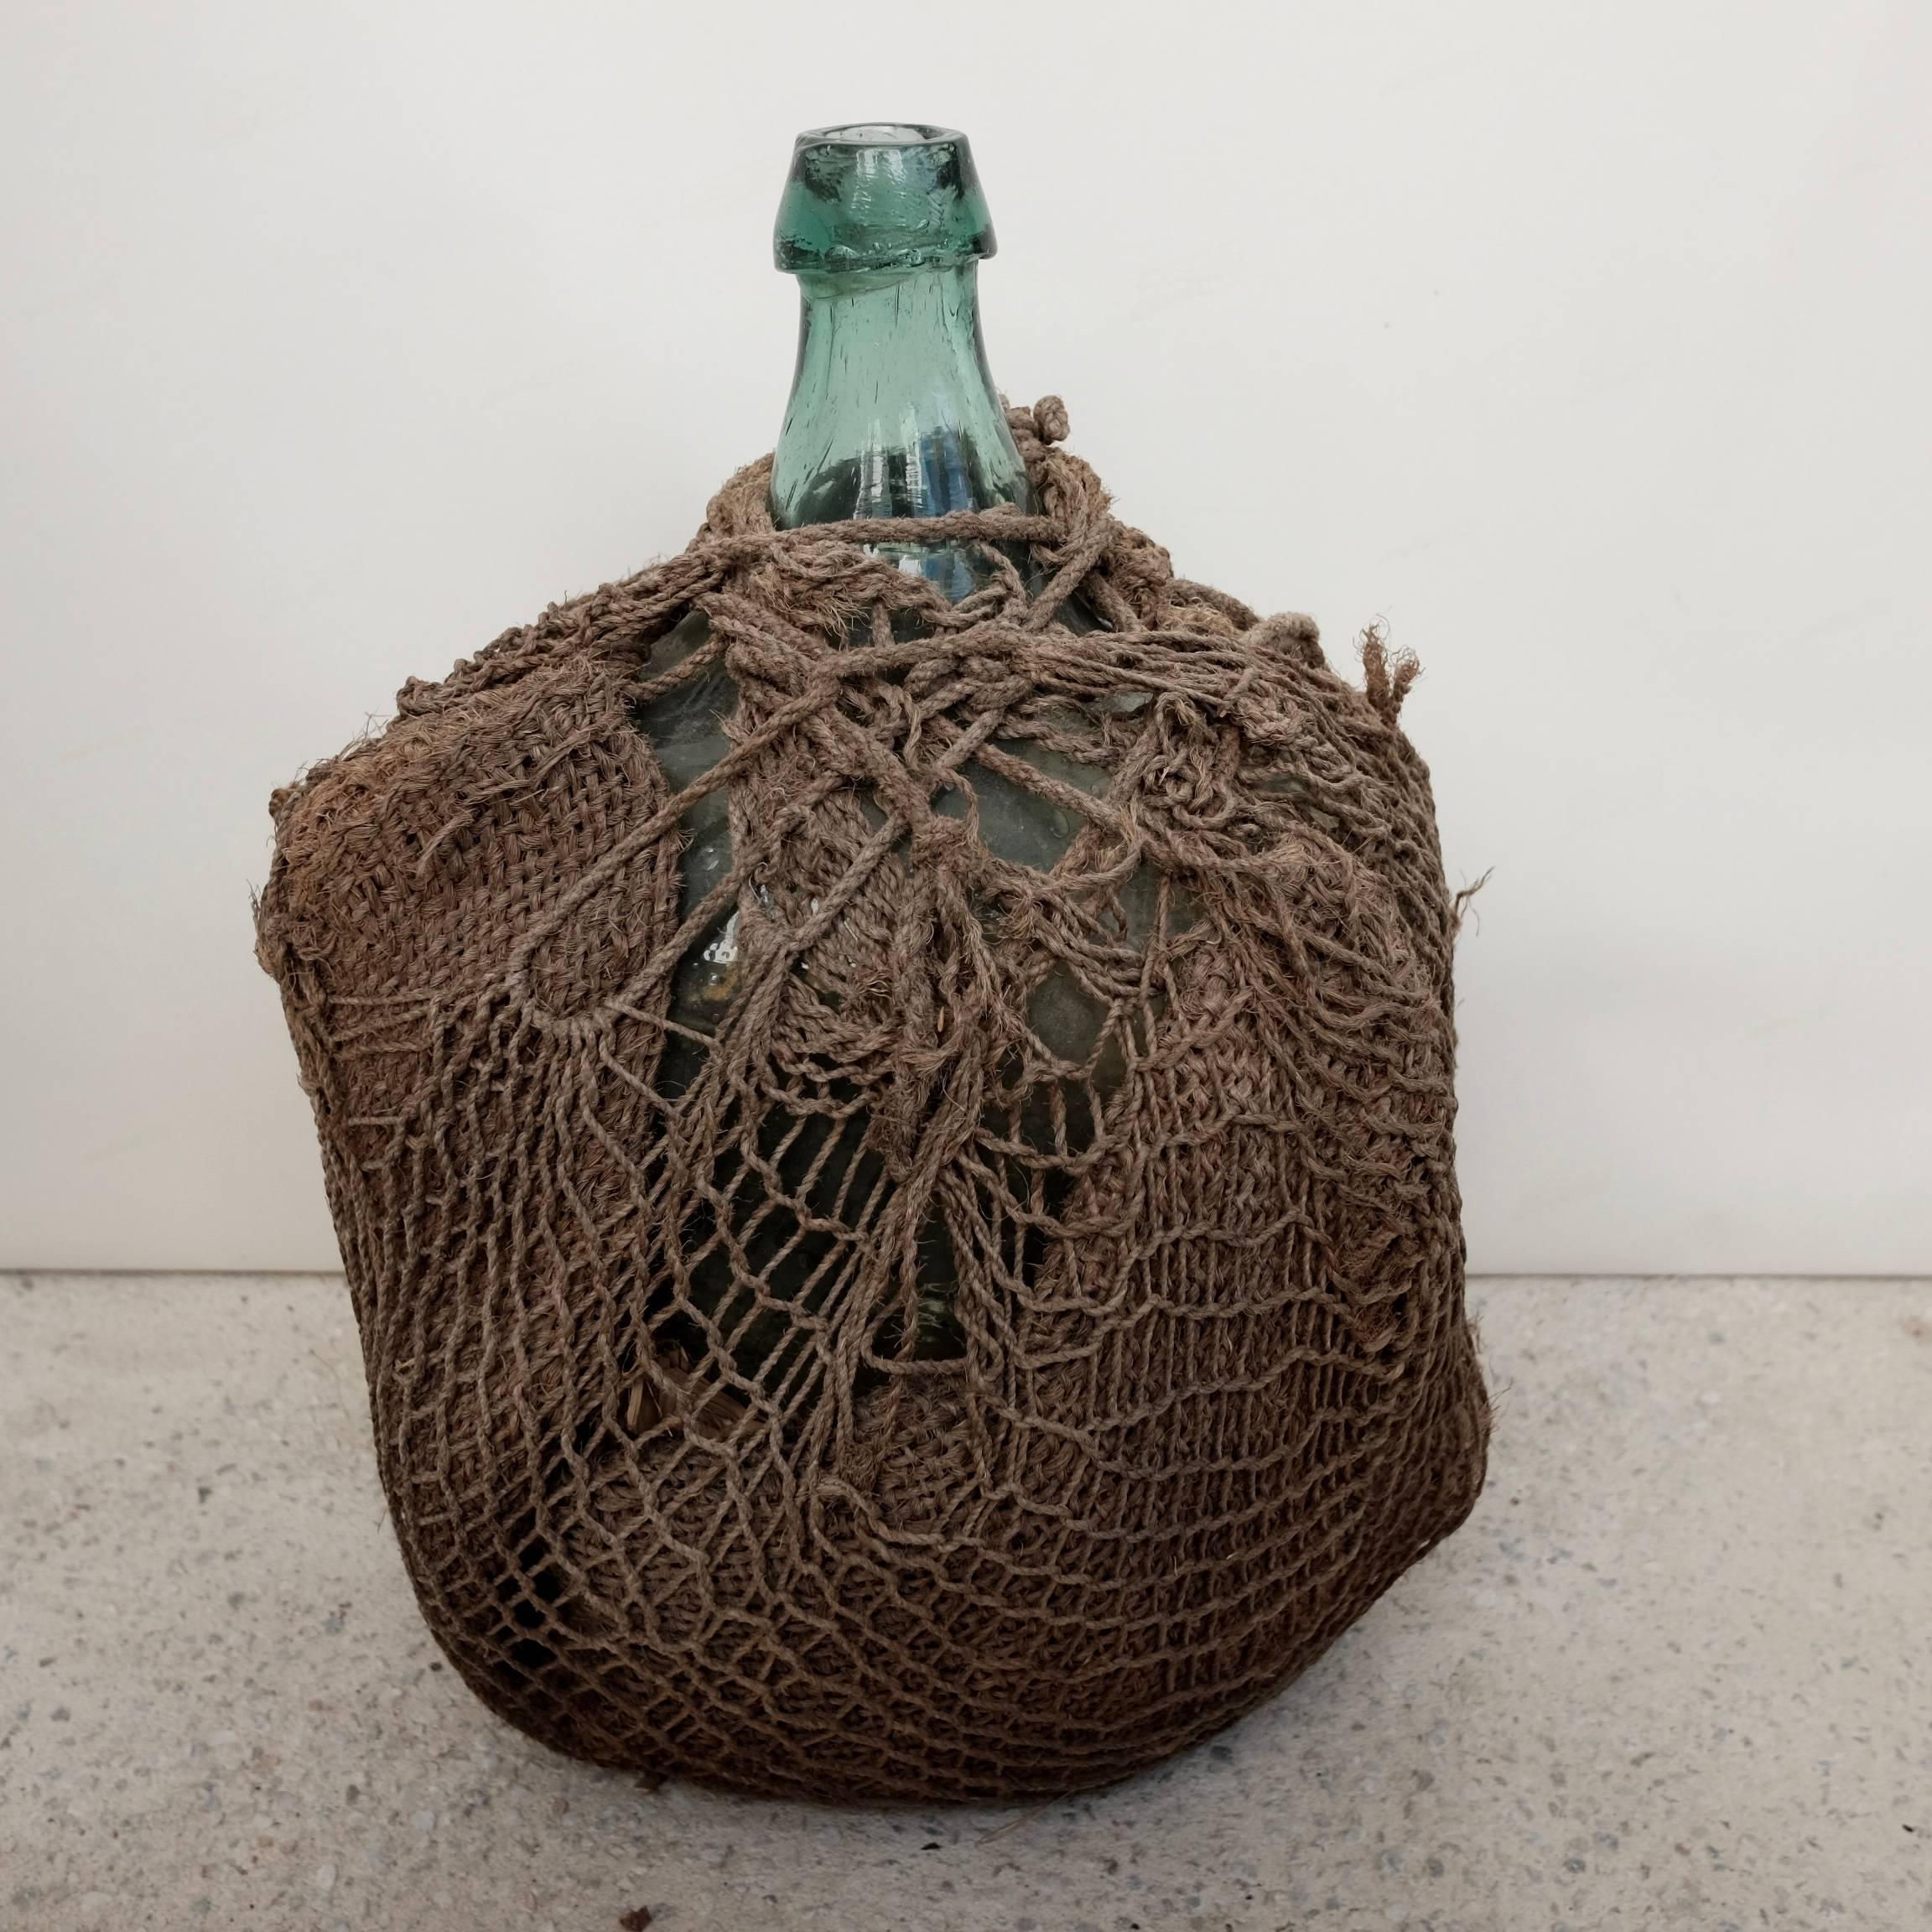 Vintage Mezcal jug with original net rope fabric used for protecting the bottle. From southern Oaxaca, Mexico. This vessel is one of a kind.